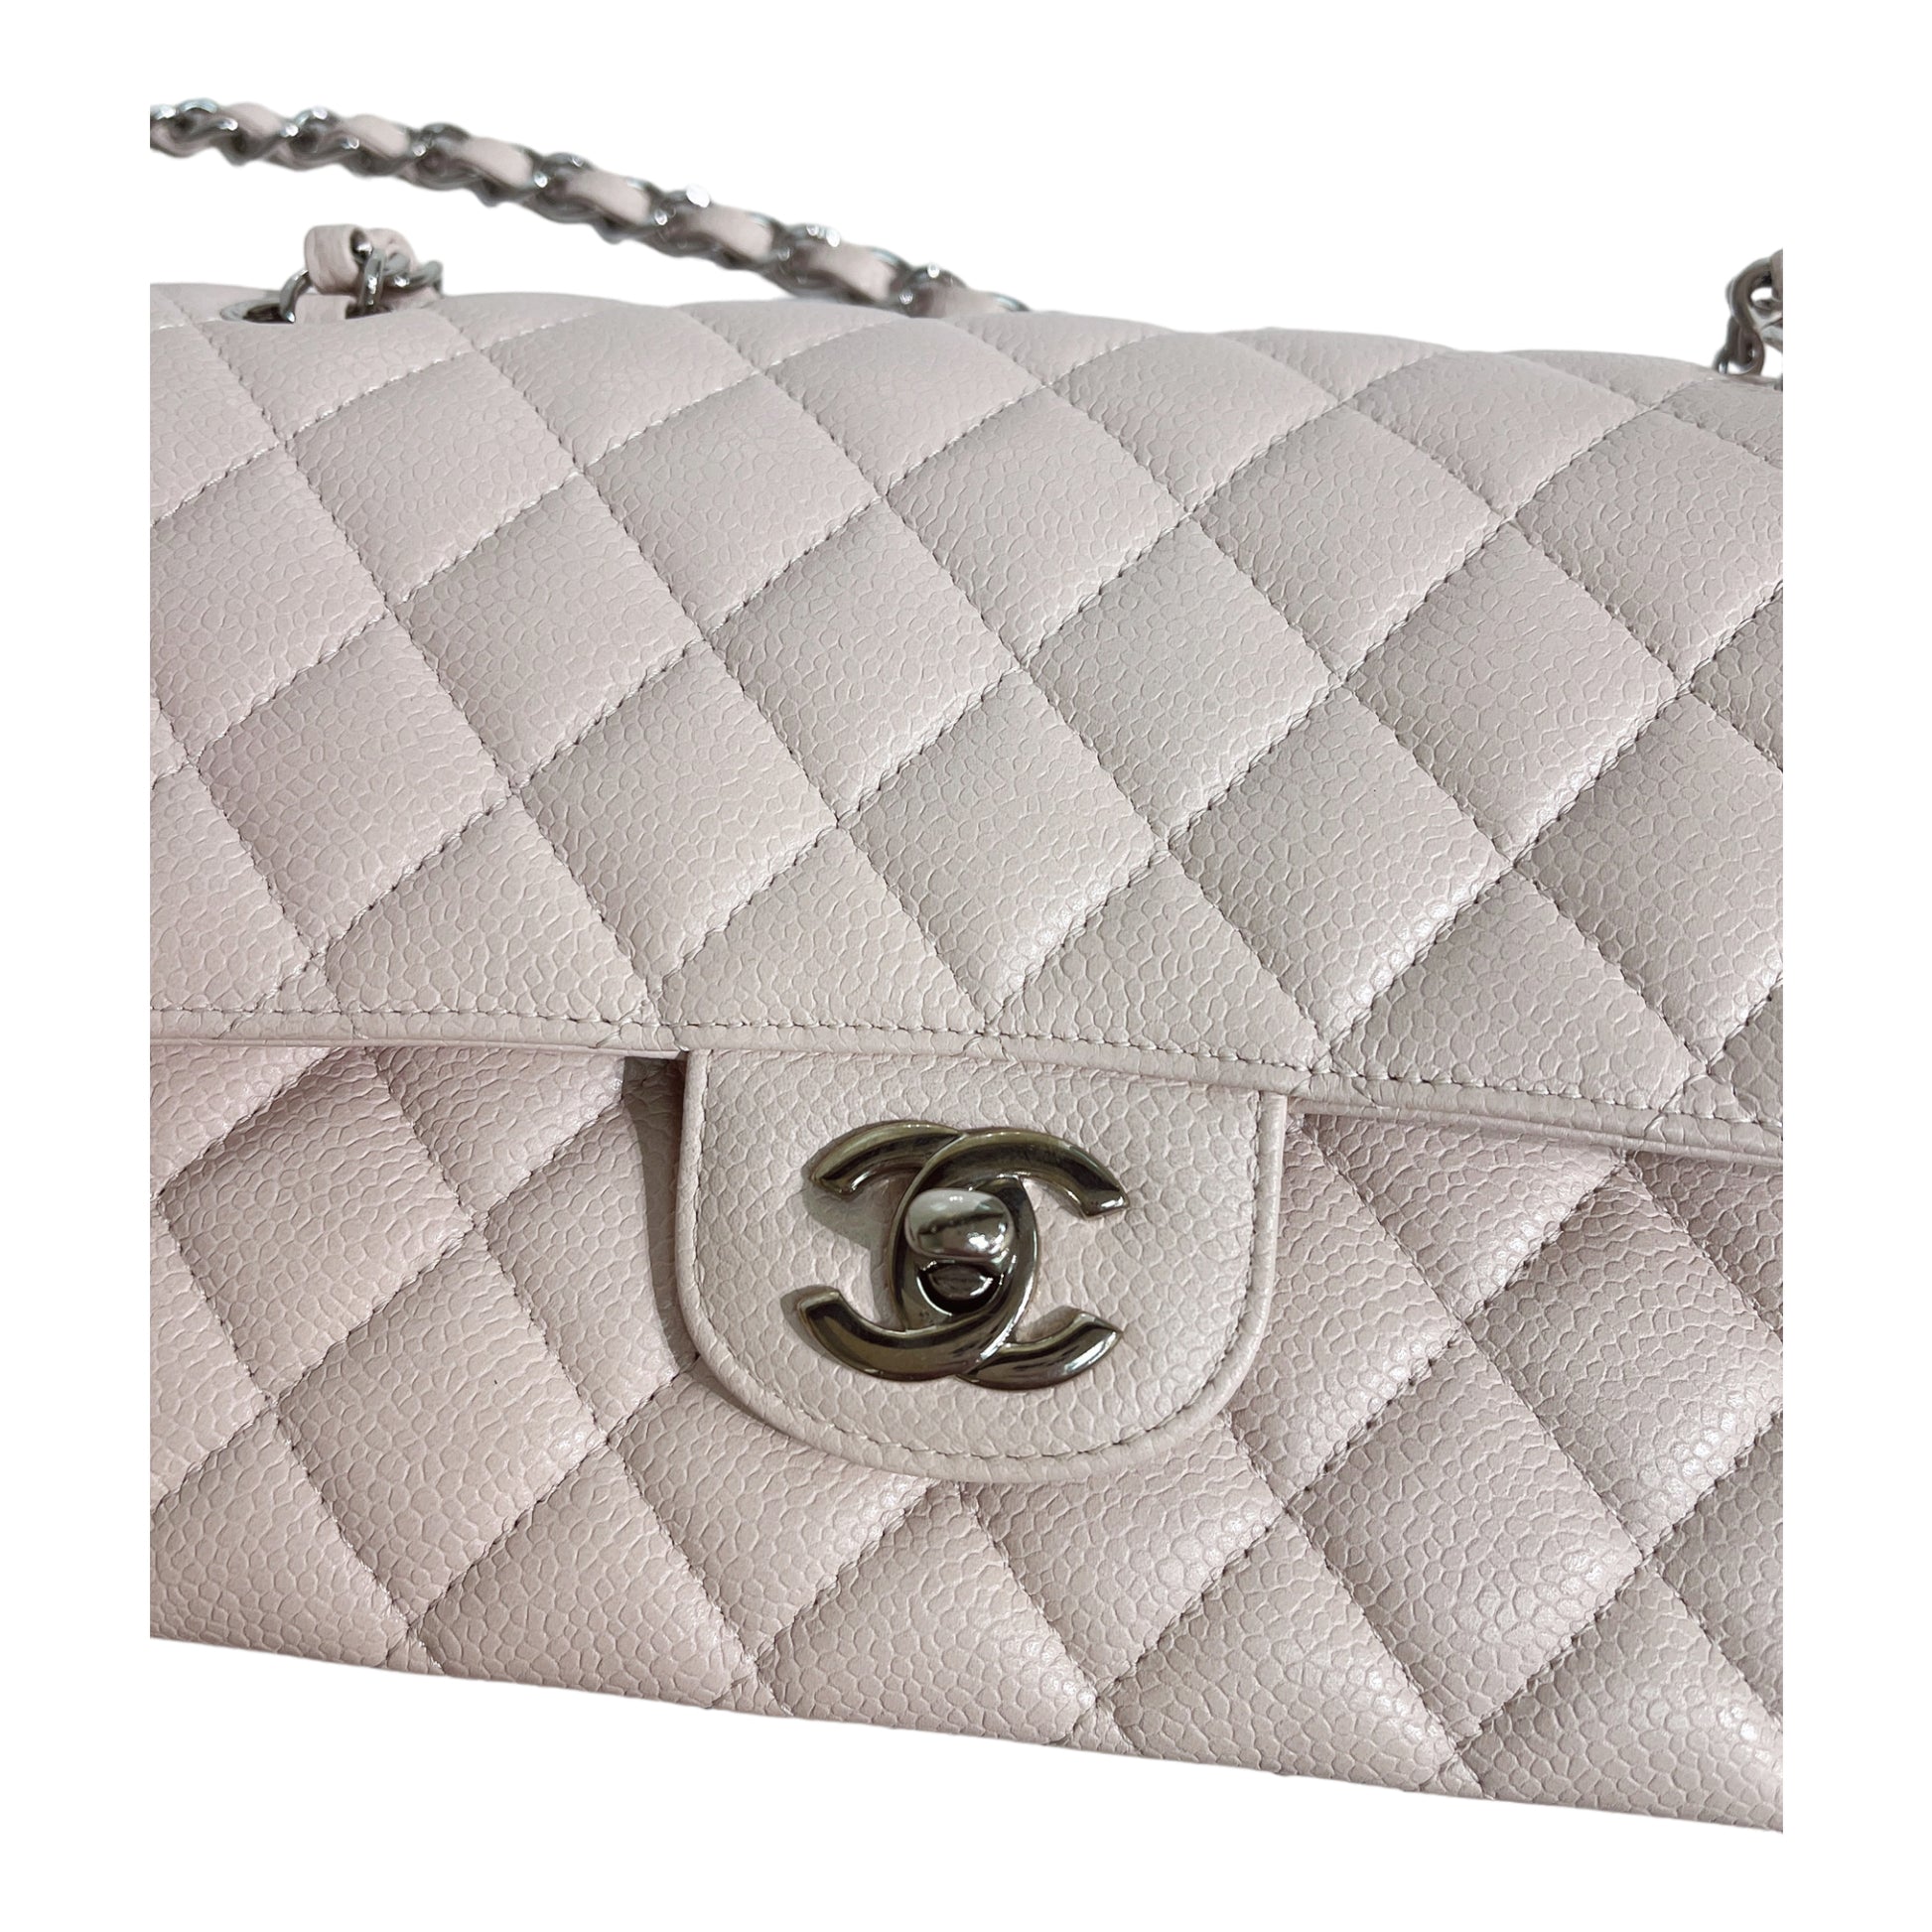 Chanel Classic M/L Medium Flap Quilted Light Pink Caviar Gold Hardware –  Coco Approved Studio